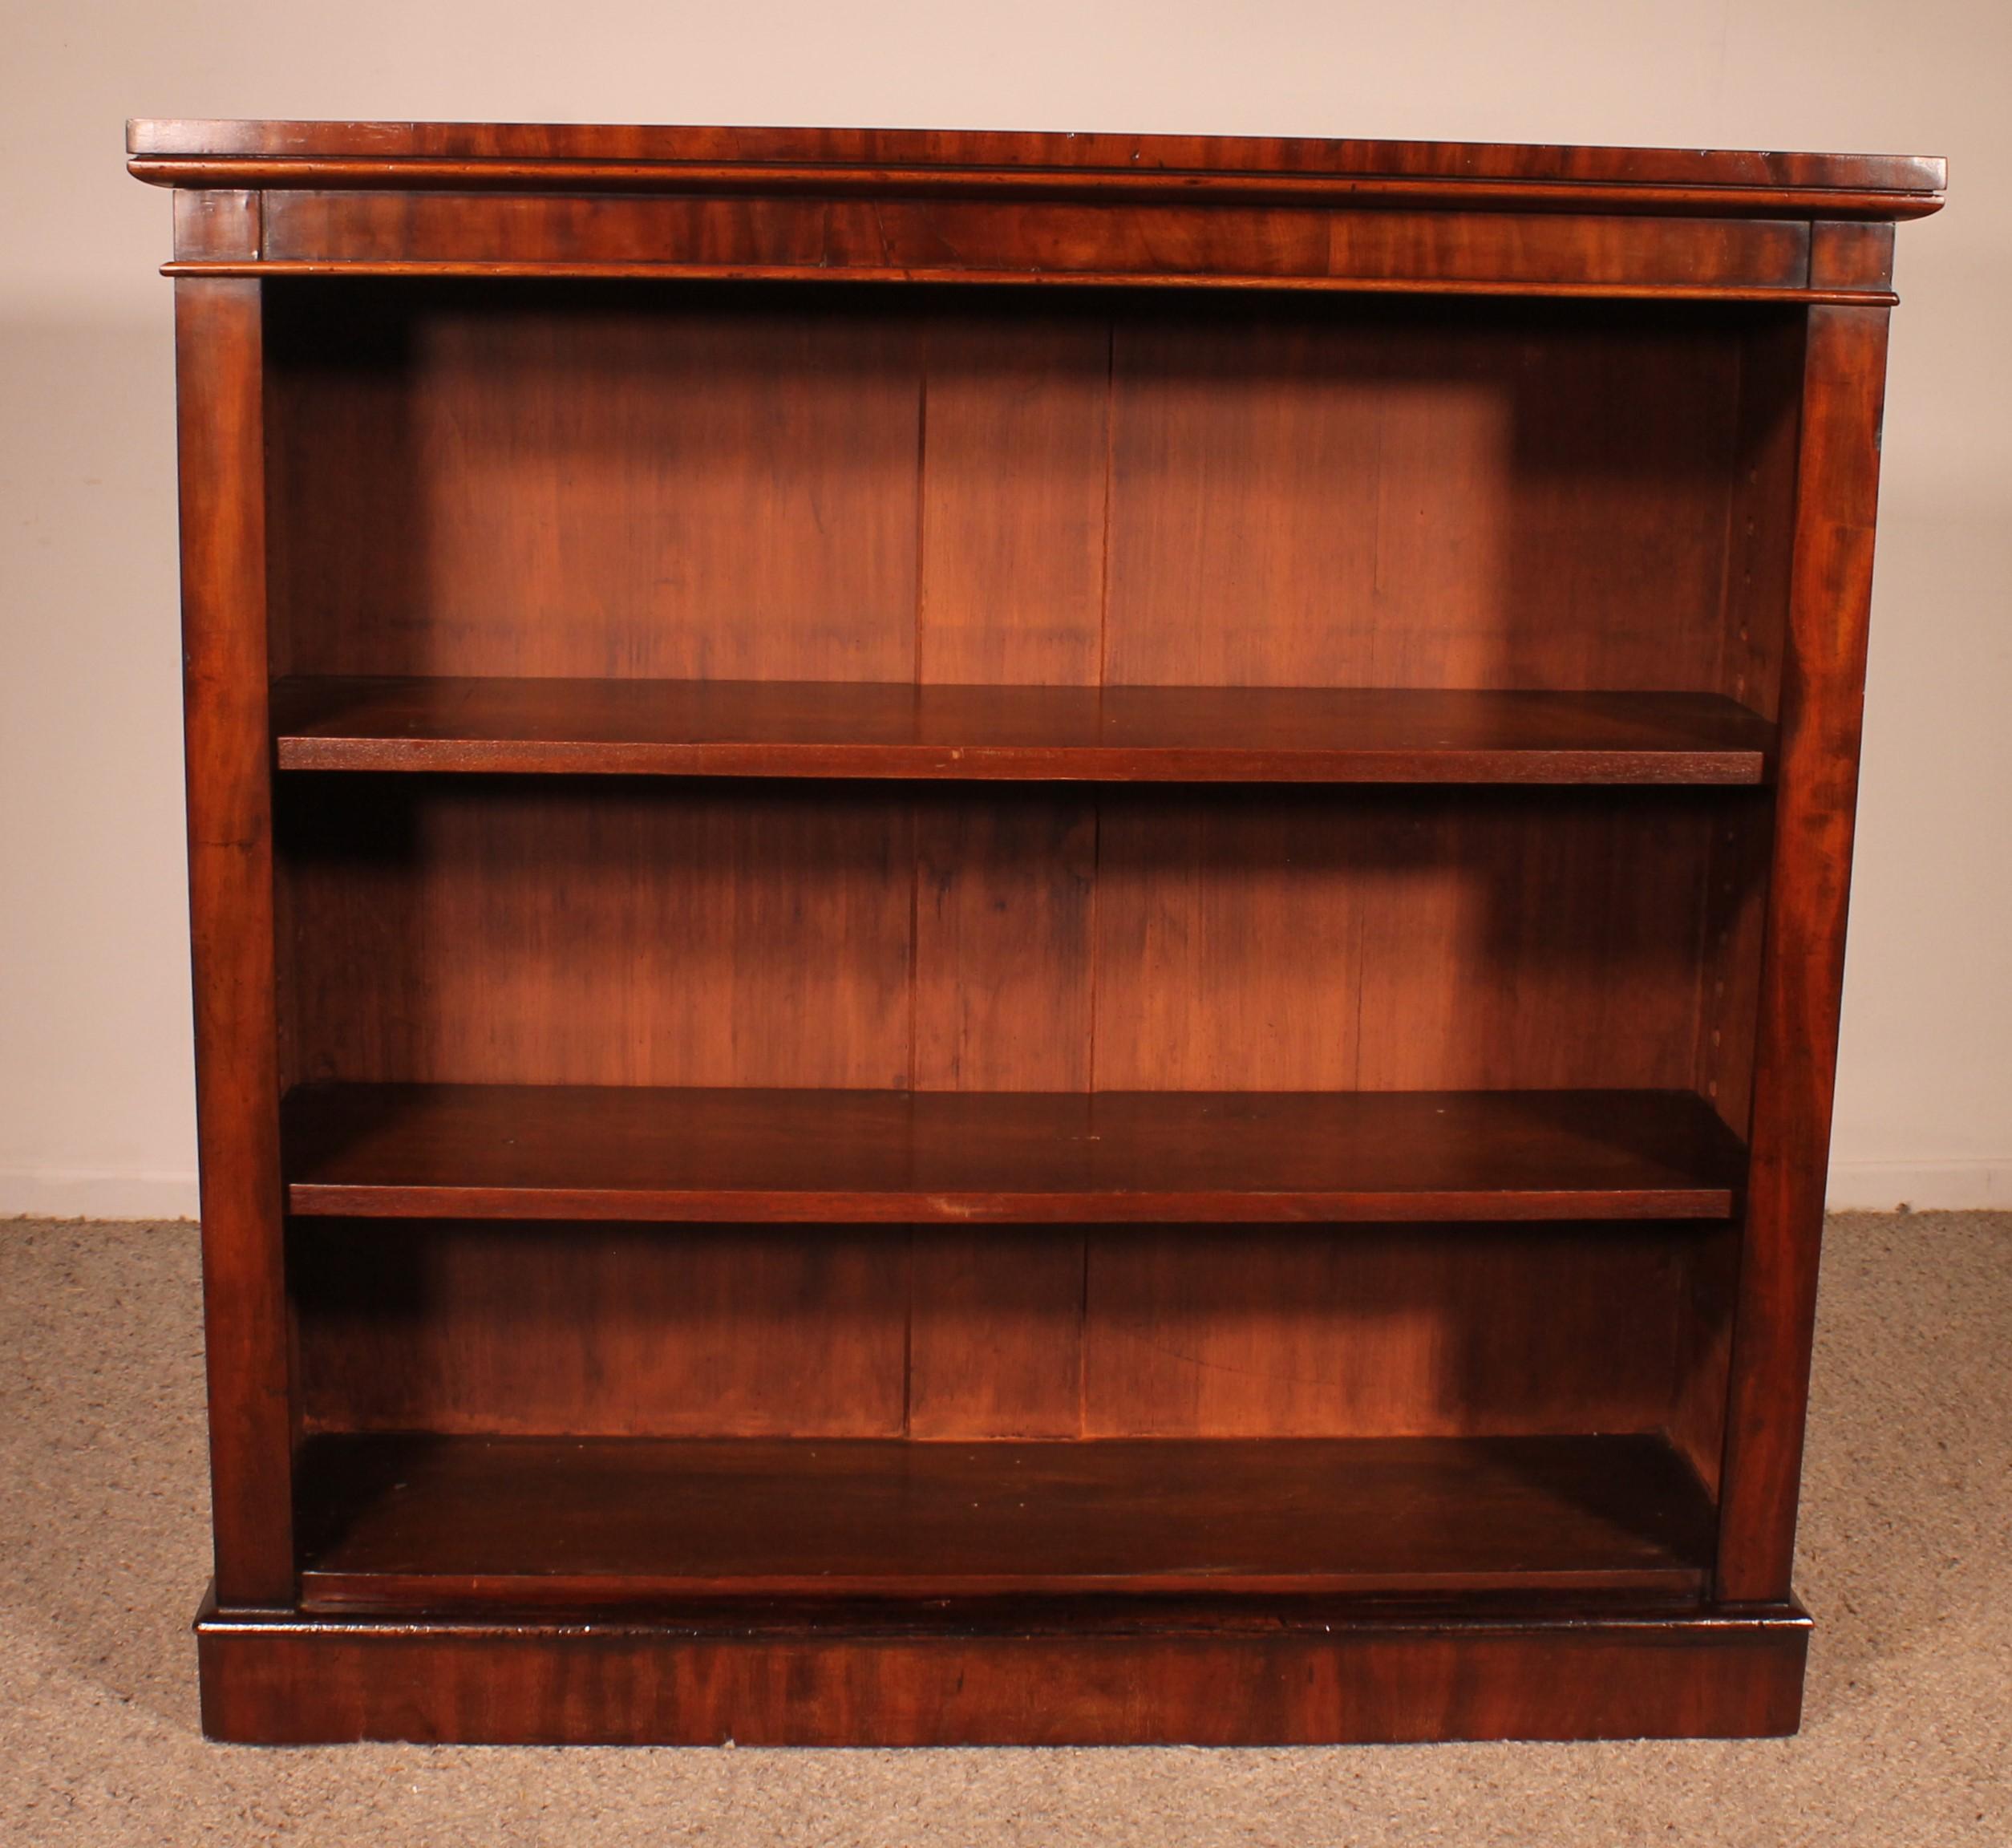 Elegant open bookcase in mahogany from the 19th century from England circa 1850
Beautiful good quality bookcase with mahogany with a beautiful flames
Well proportioned and simple lines
Original shelves with a beautiful patina
It is possible to